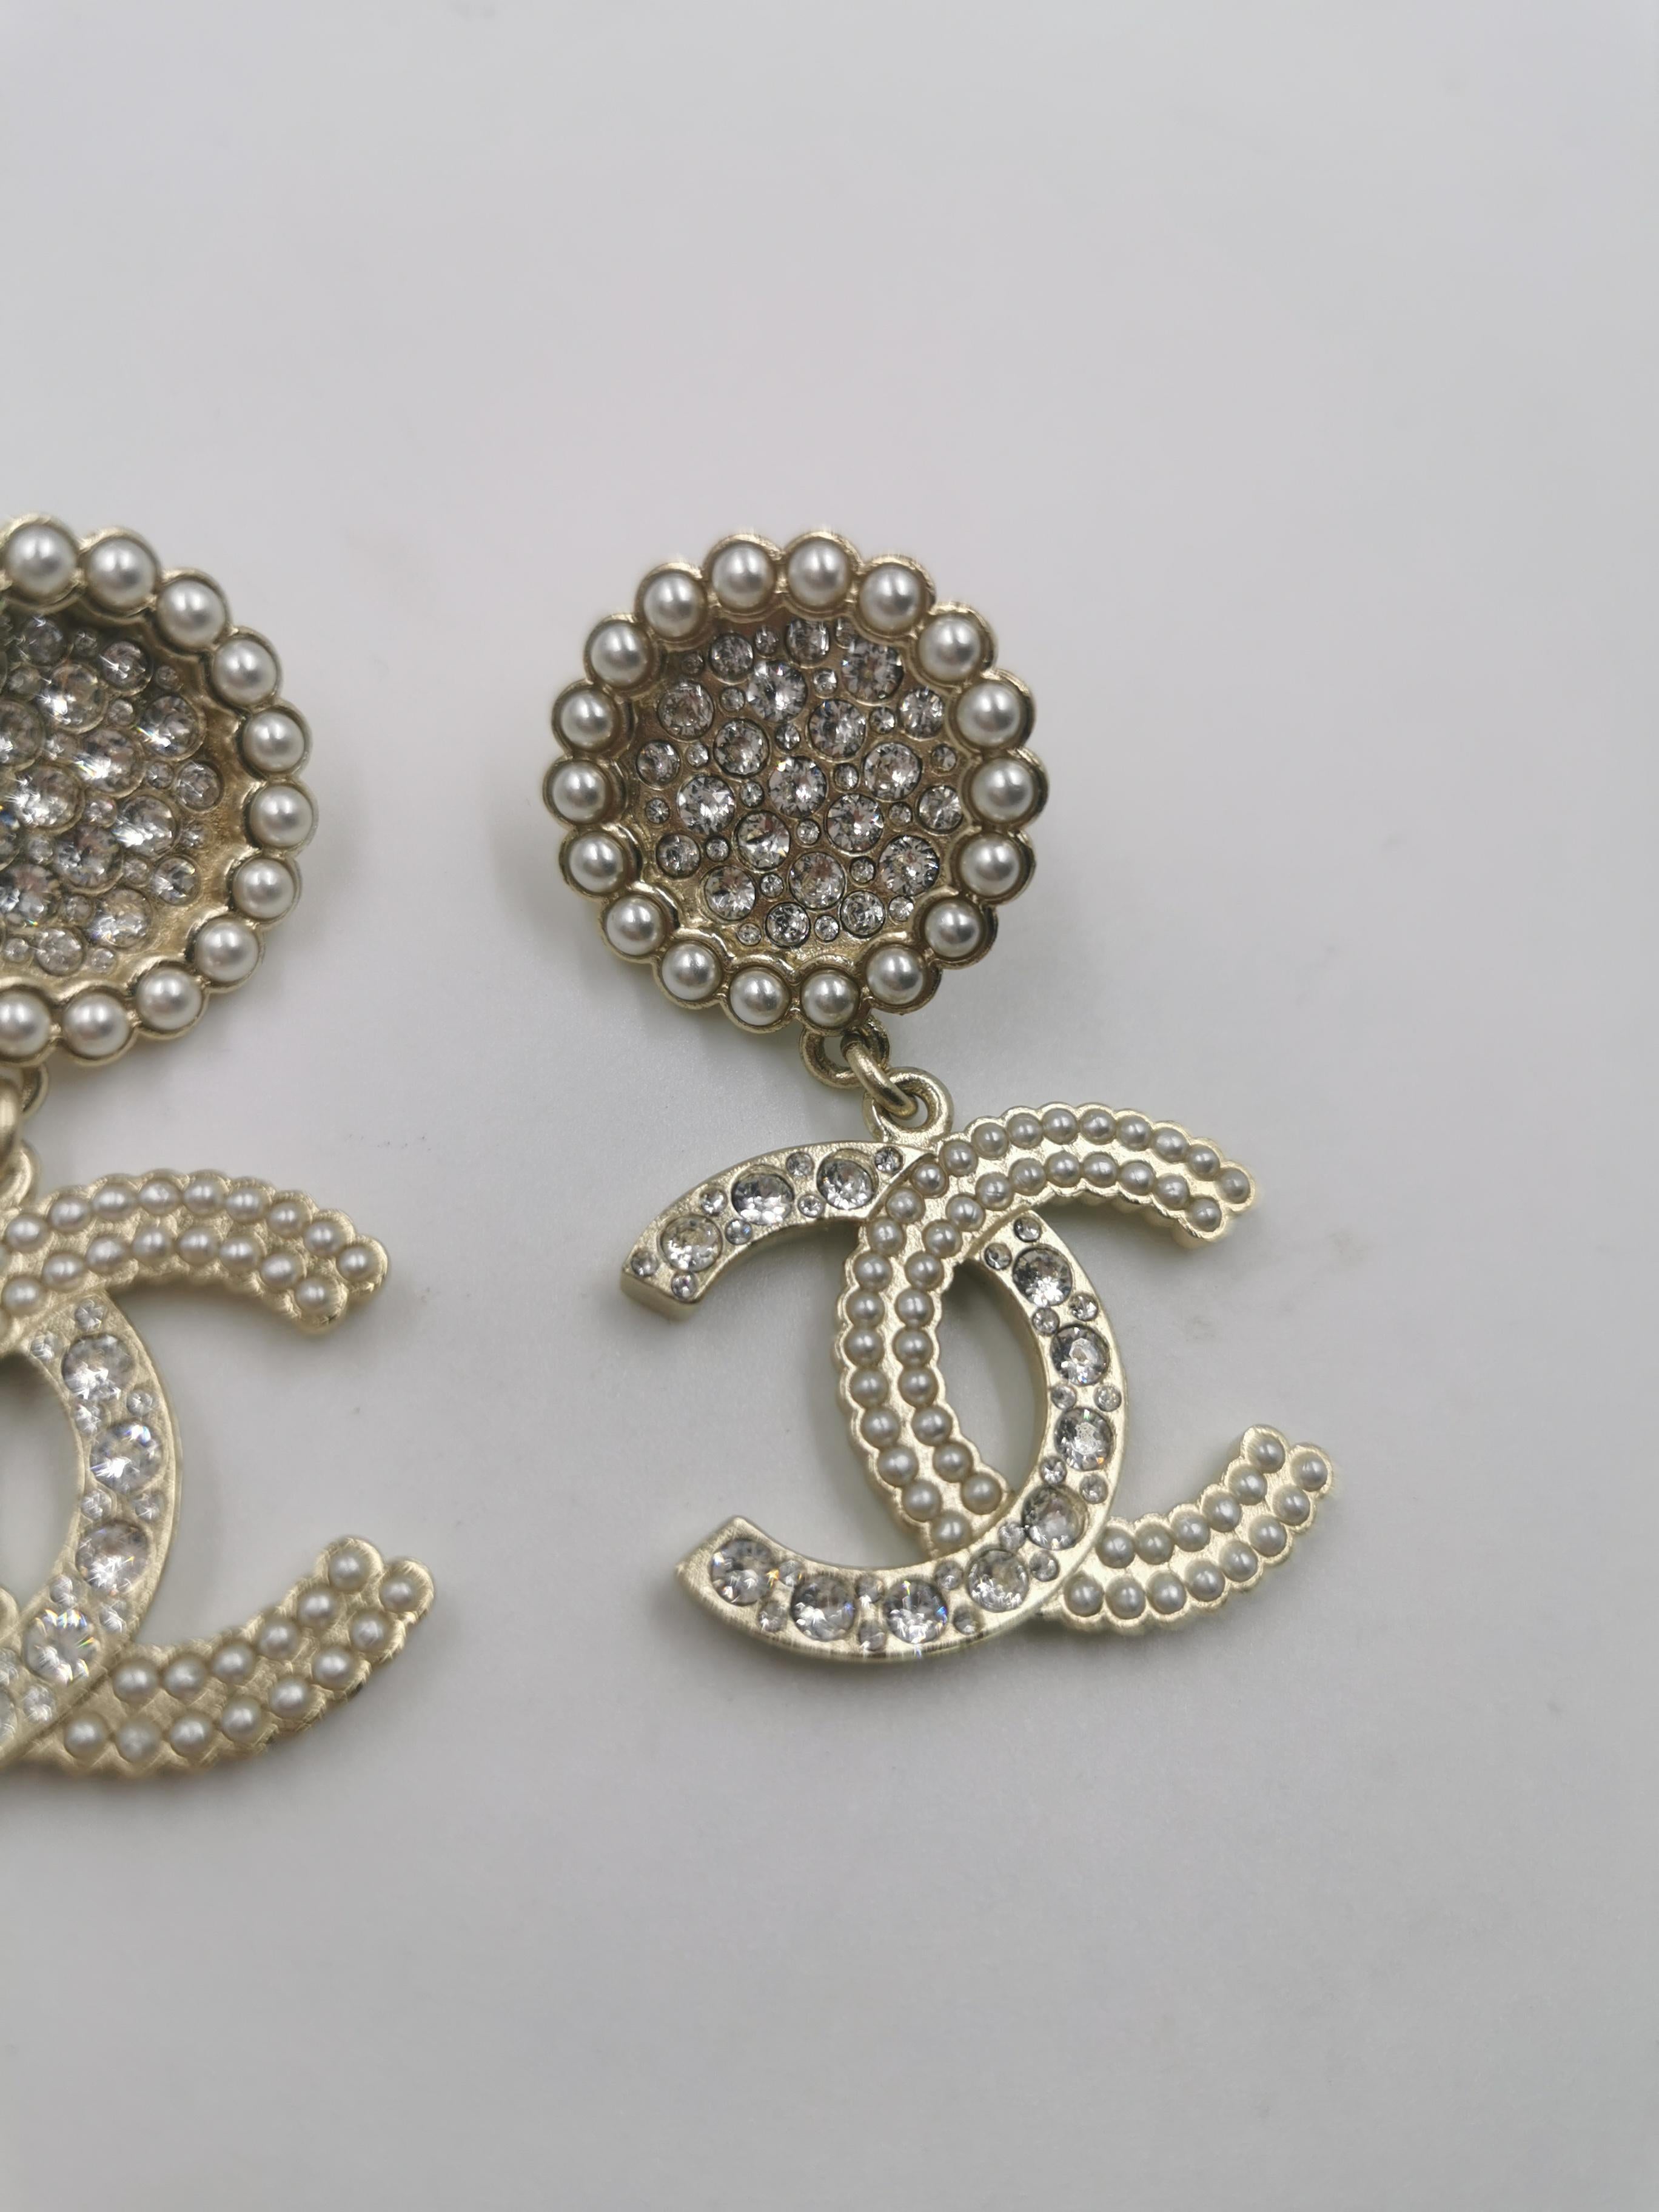 Introducing the captivating Chanel 21 Runway CC Light Gold LARGE Massive Rhinestone Logo Dangling Earrings. These earrings are a true testament to the timeless elegance and iconic design that Chanel is celebrated for, making them a must-have